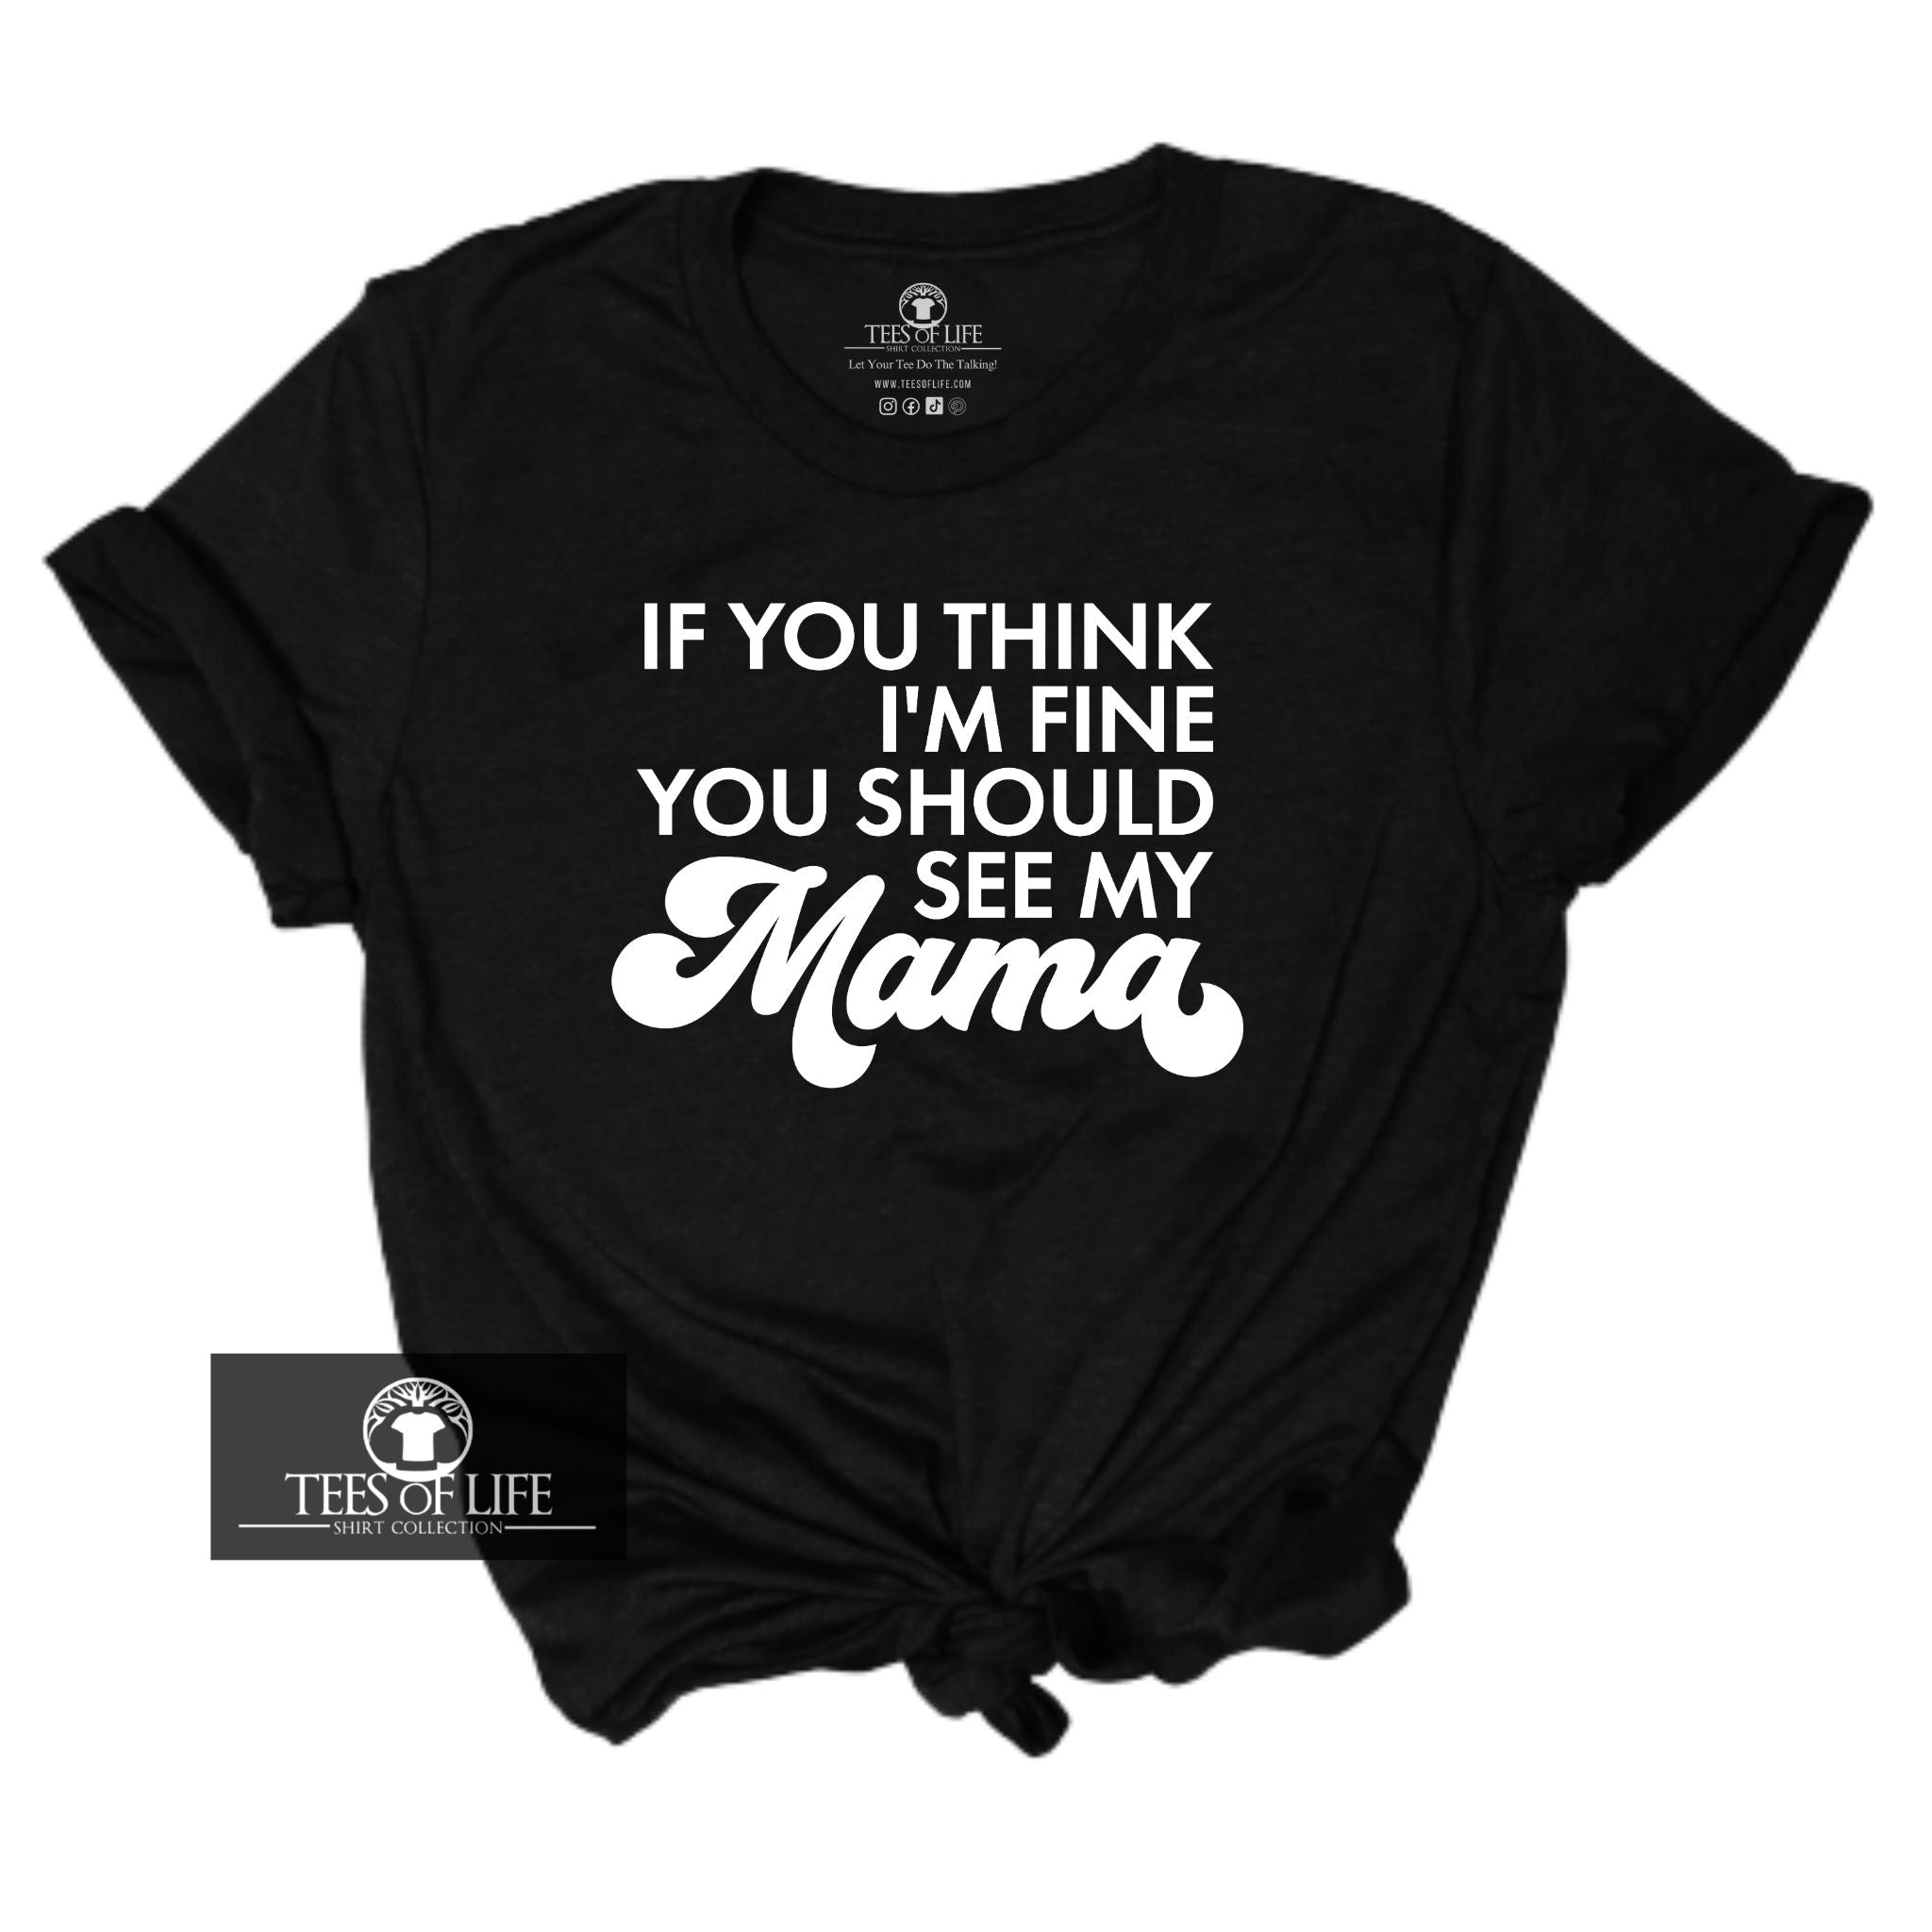 If You Think I'm Fine You Should See My Mama Unisex Tee